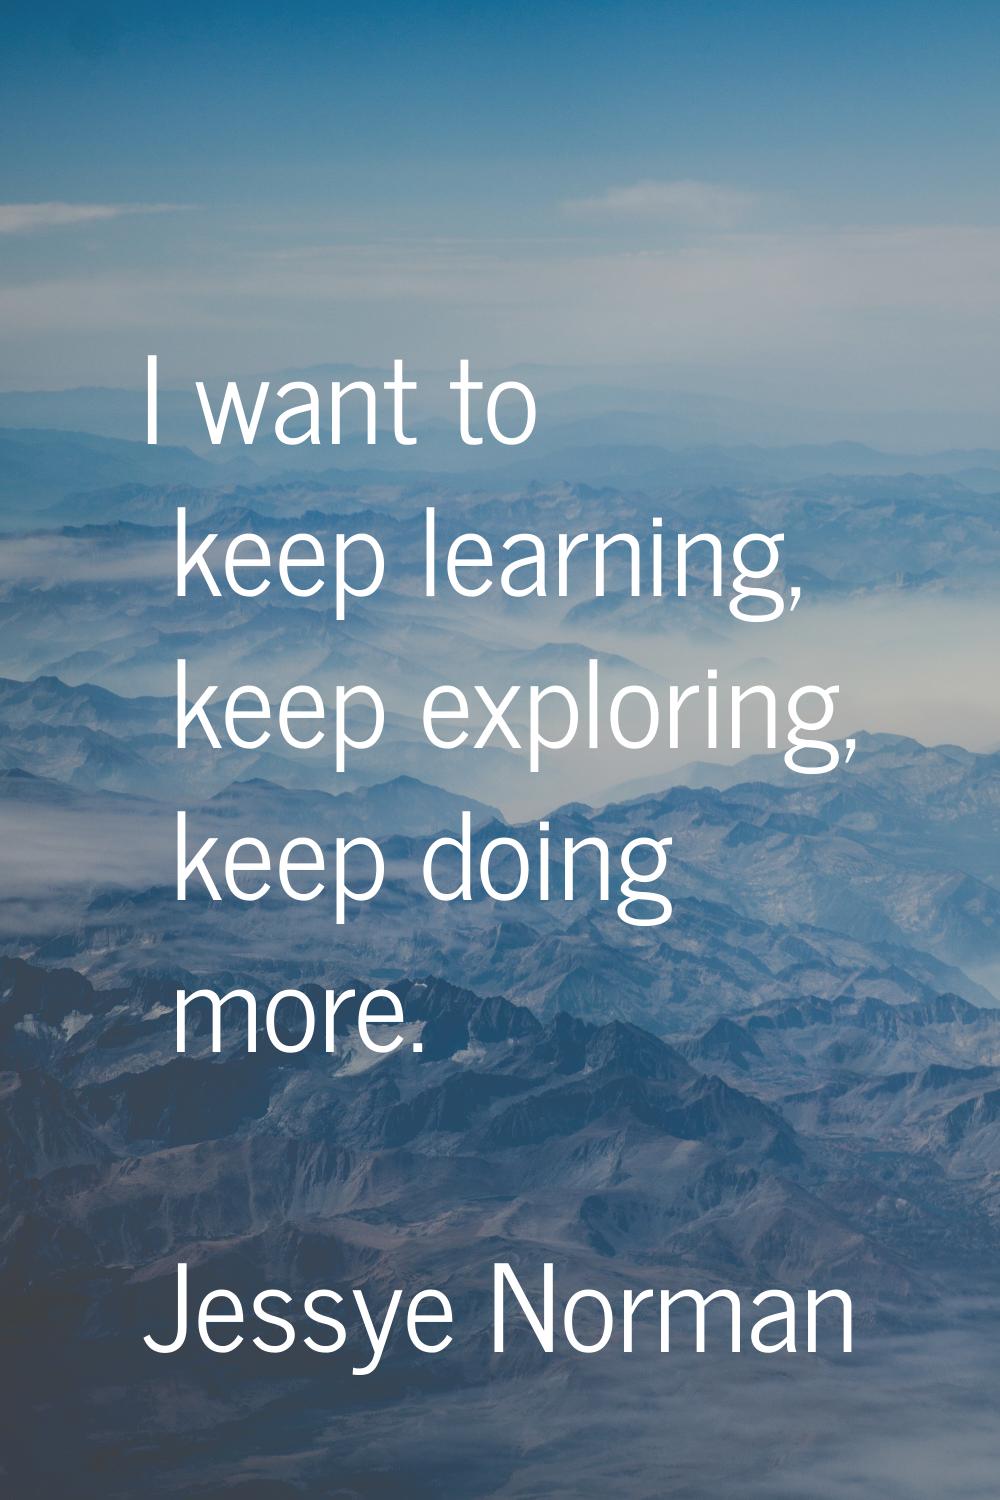 I want to keep learning, keep exploring, keep doing more.